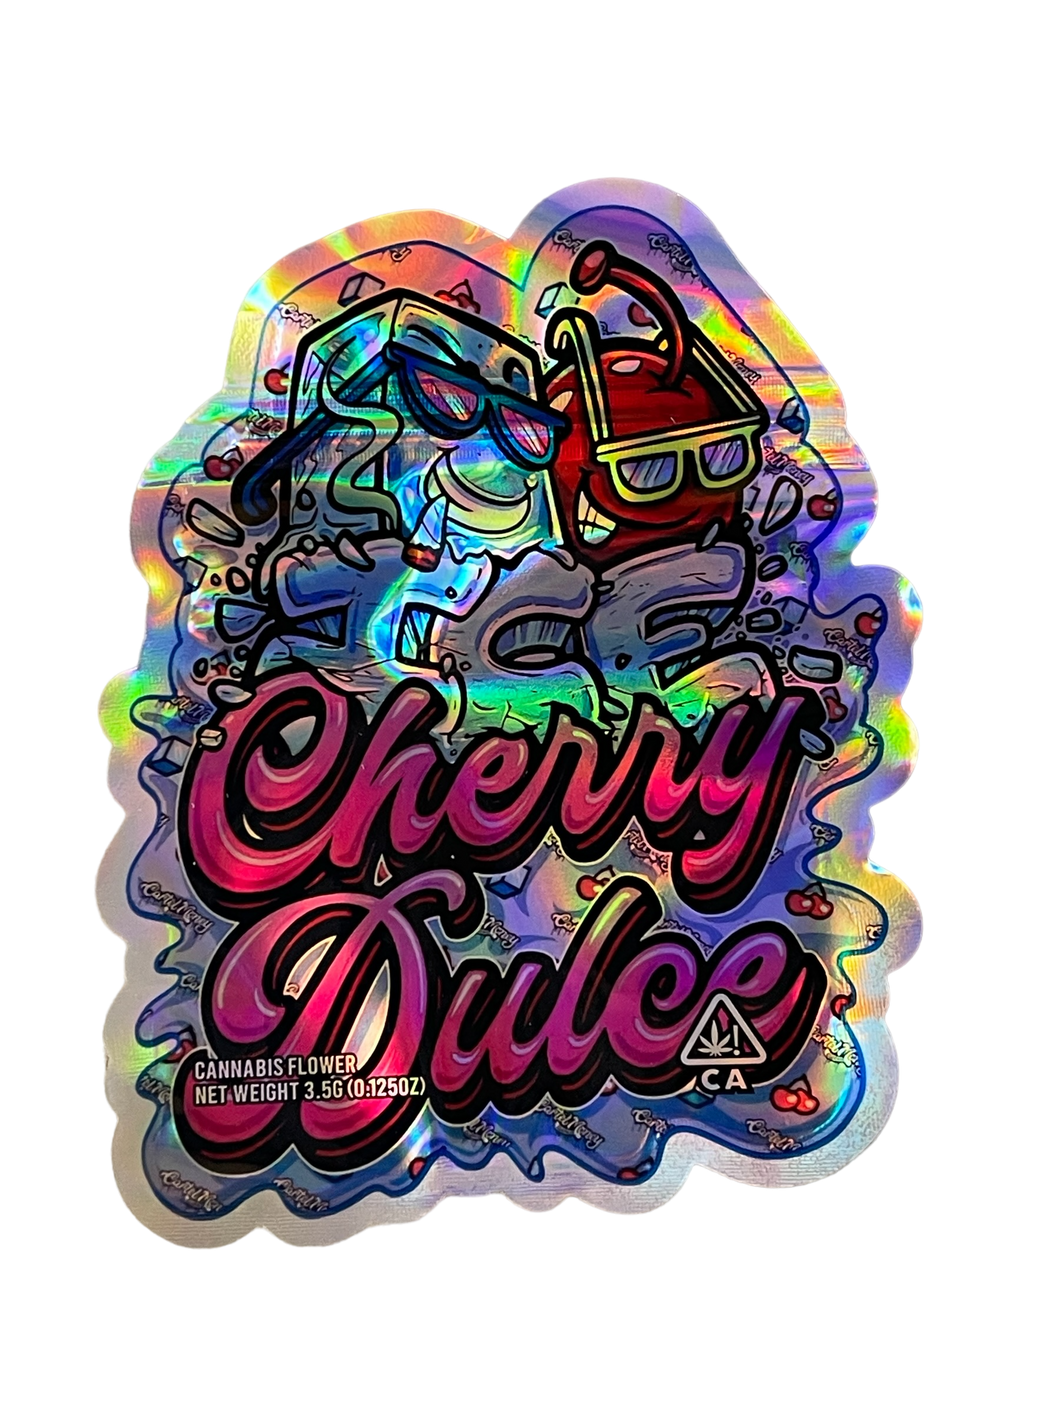 Cherry Dulce Cut out Mylar zip lock bag 3.5G Holographic